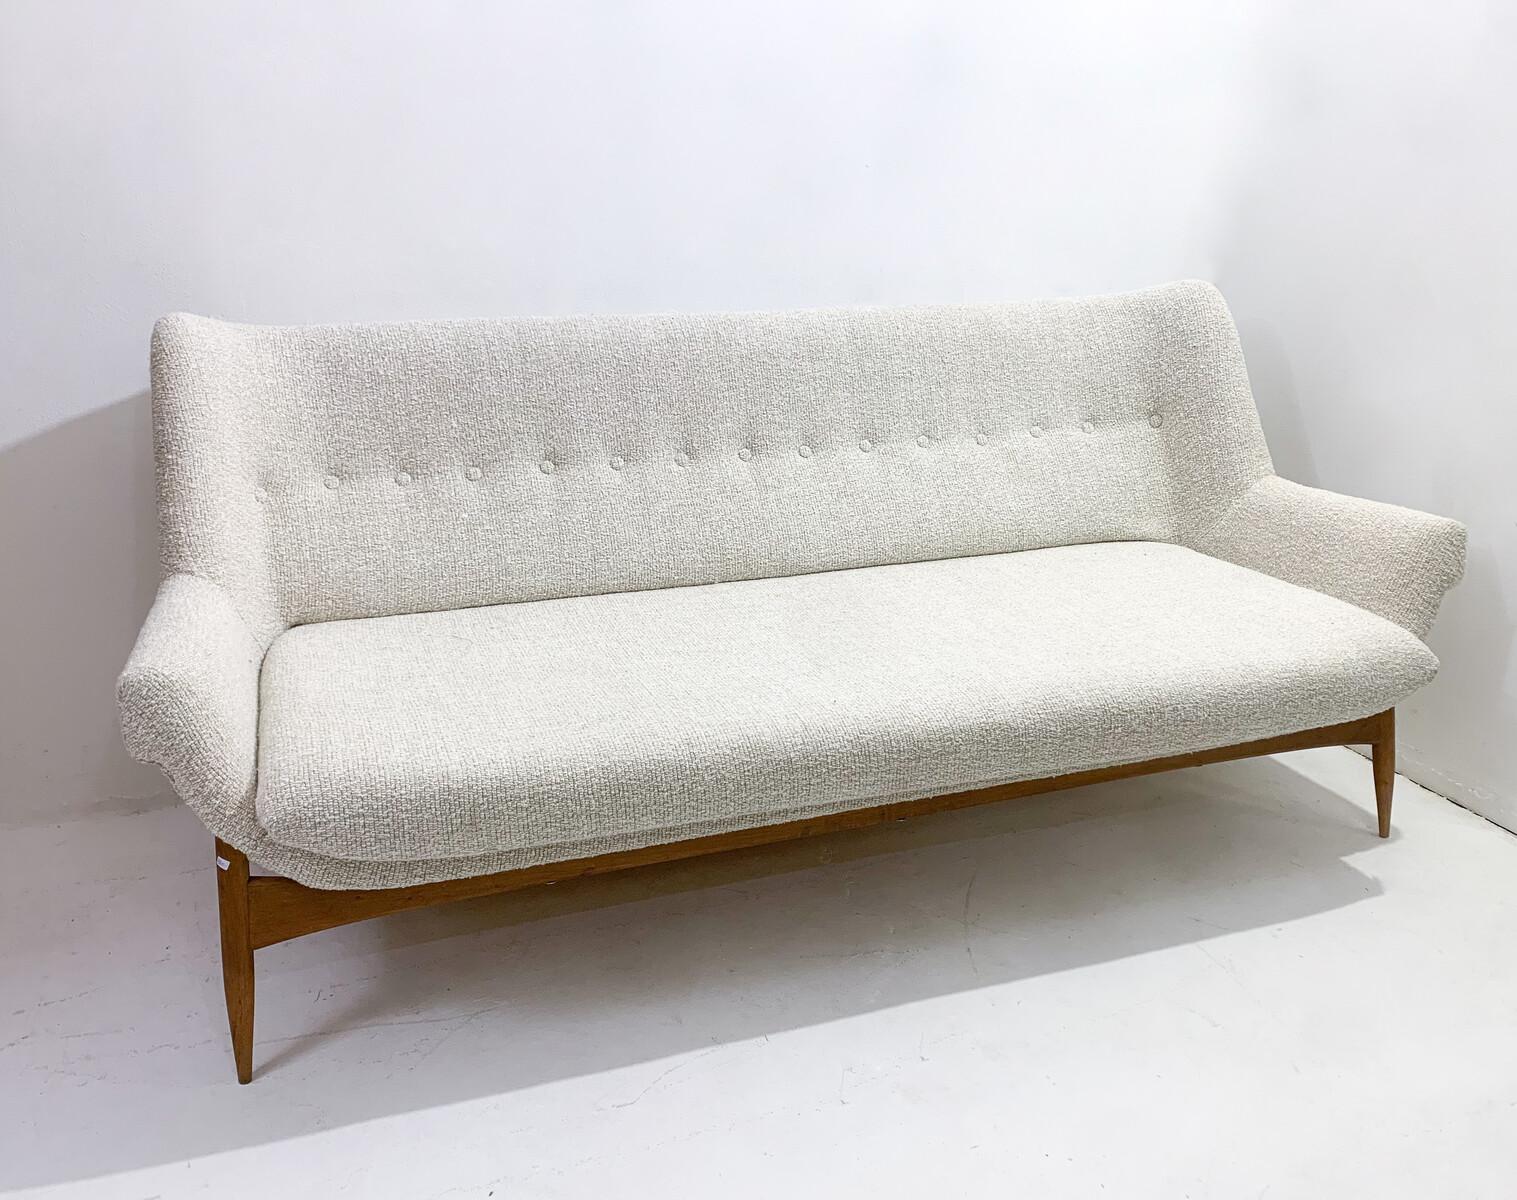 Mid-Century Modern Sofa by Julia Gaubek, Beige Upholstery, Hungary, 1950s For Sale 1